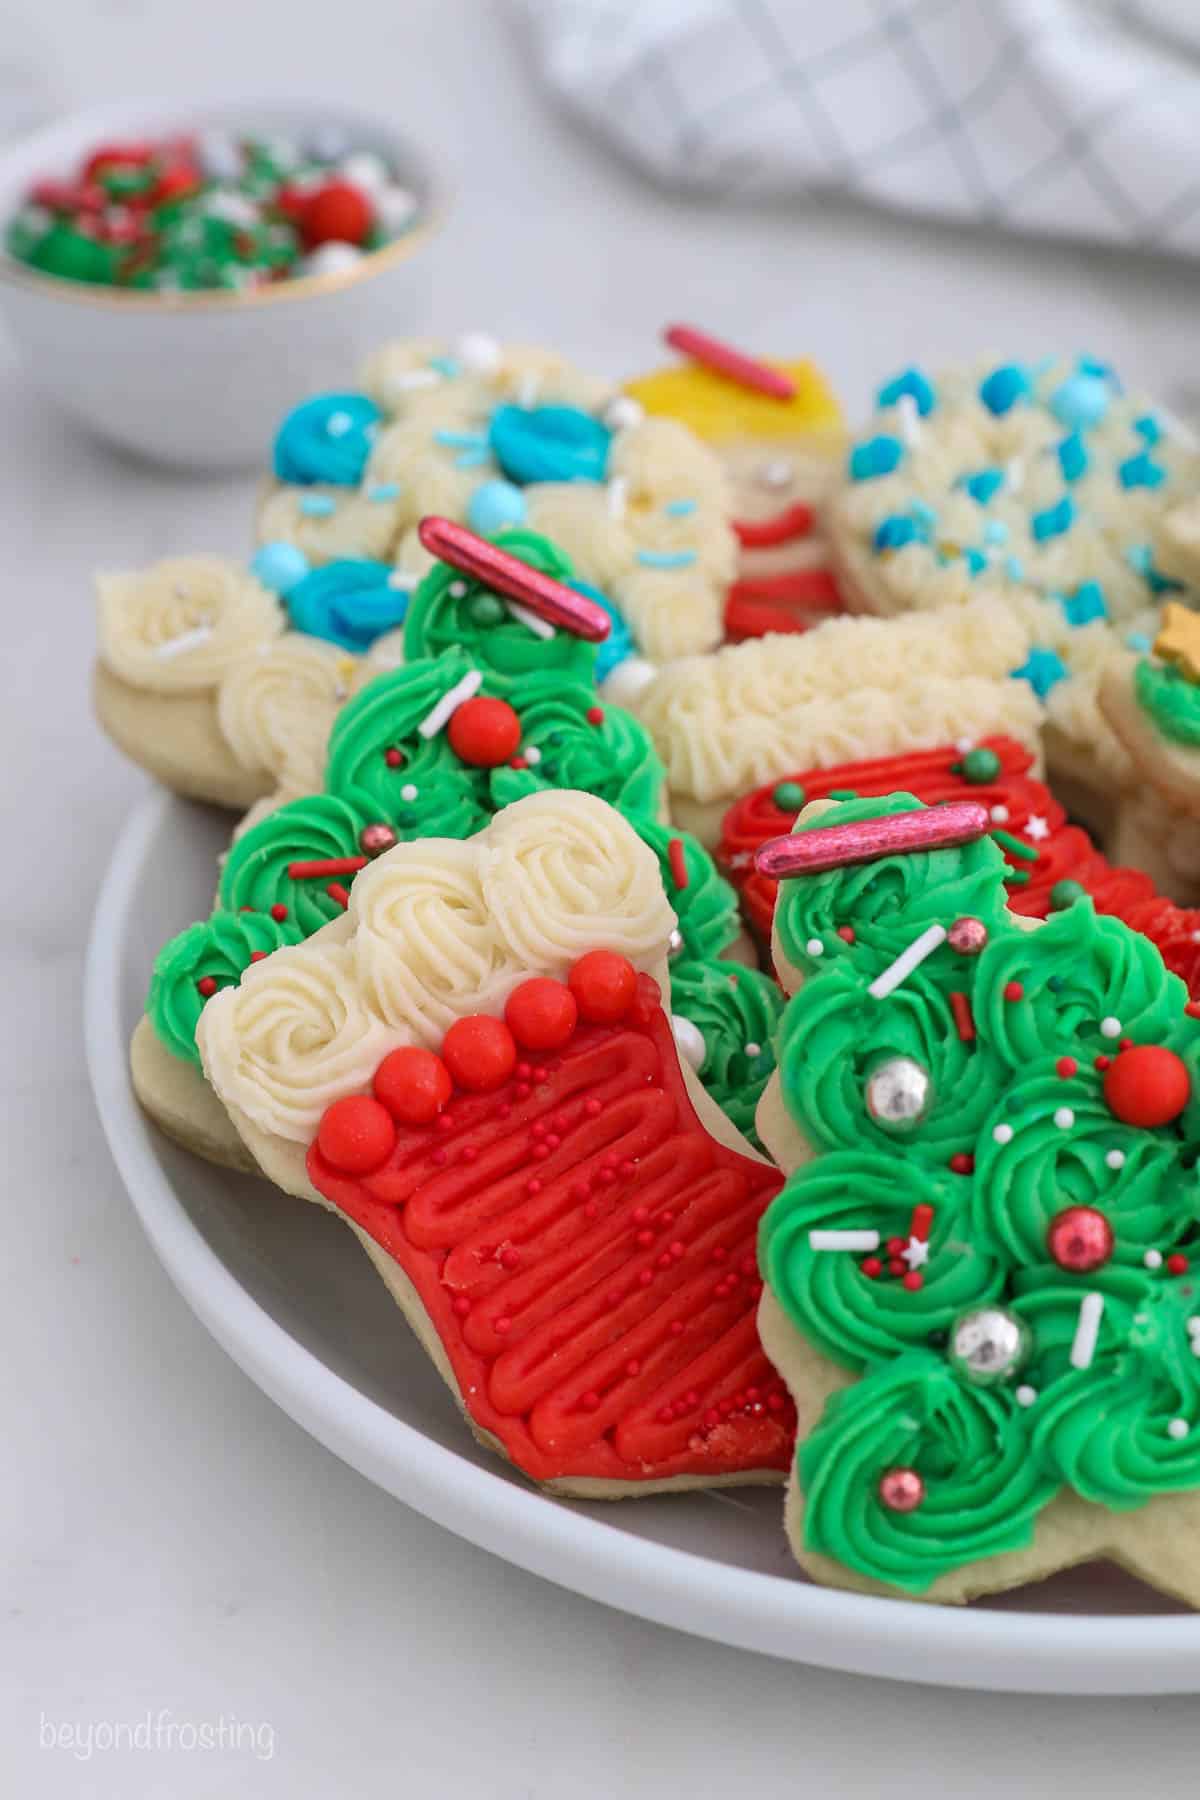 Decorated Christmas cookies with buttercream and sprinkles